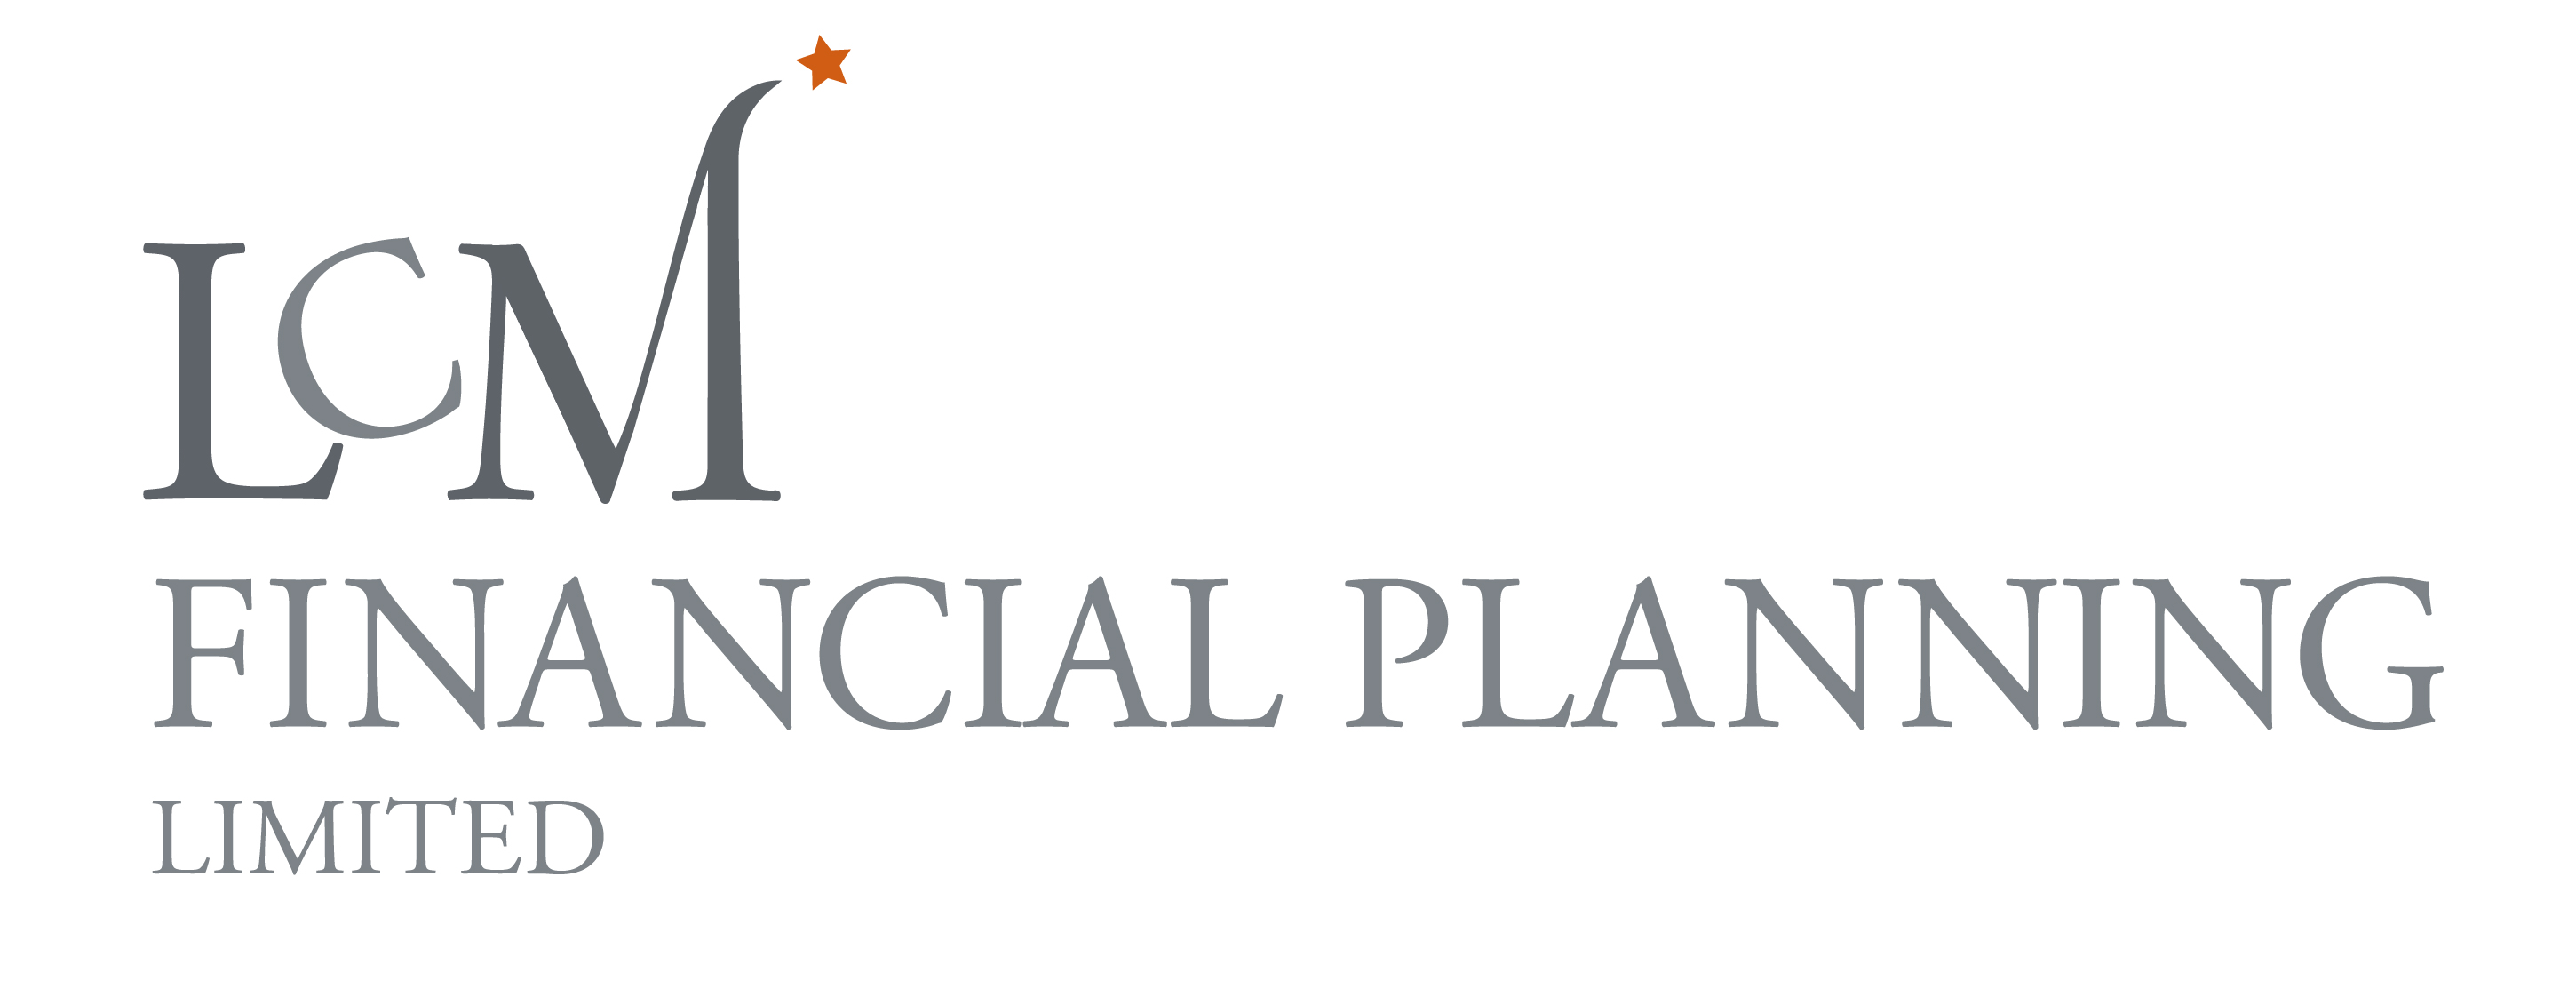 LCM Financial Planning Limited